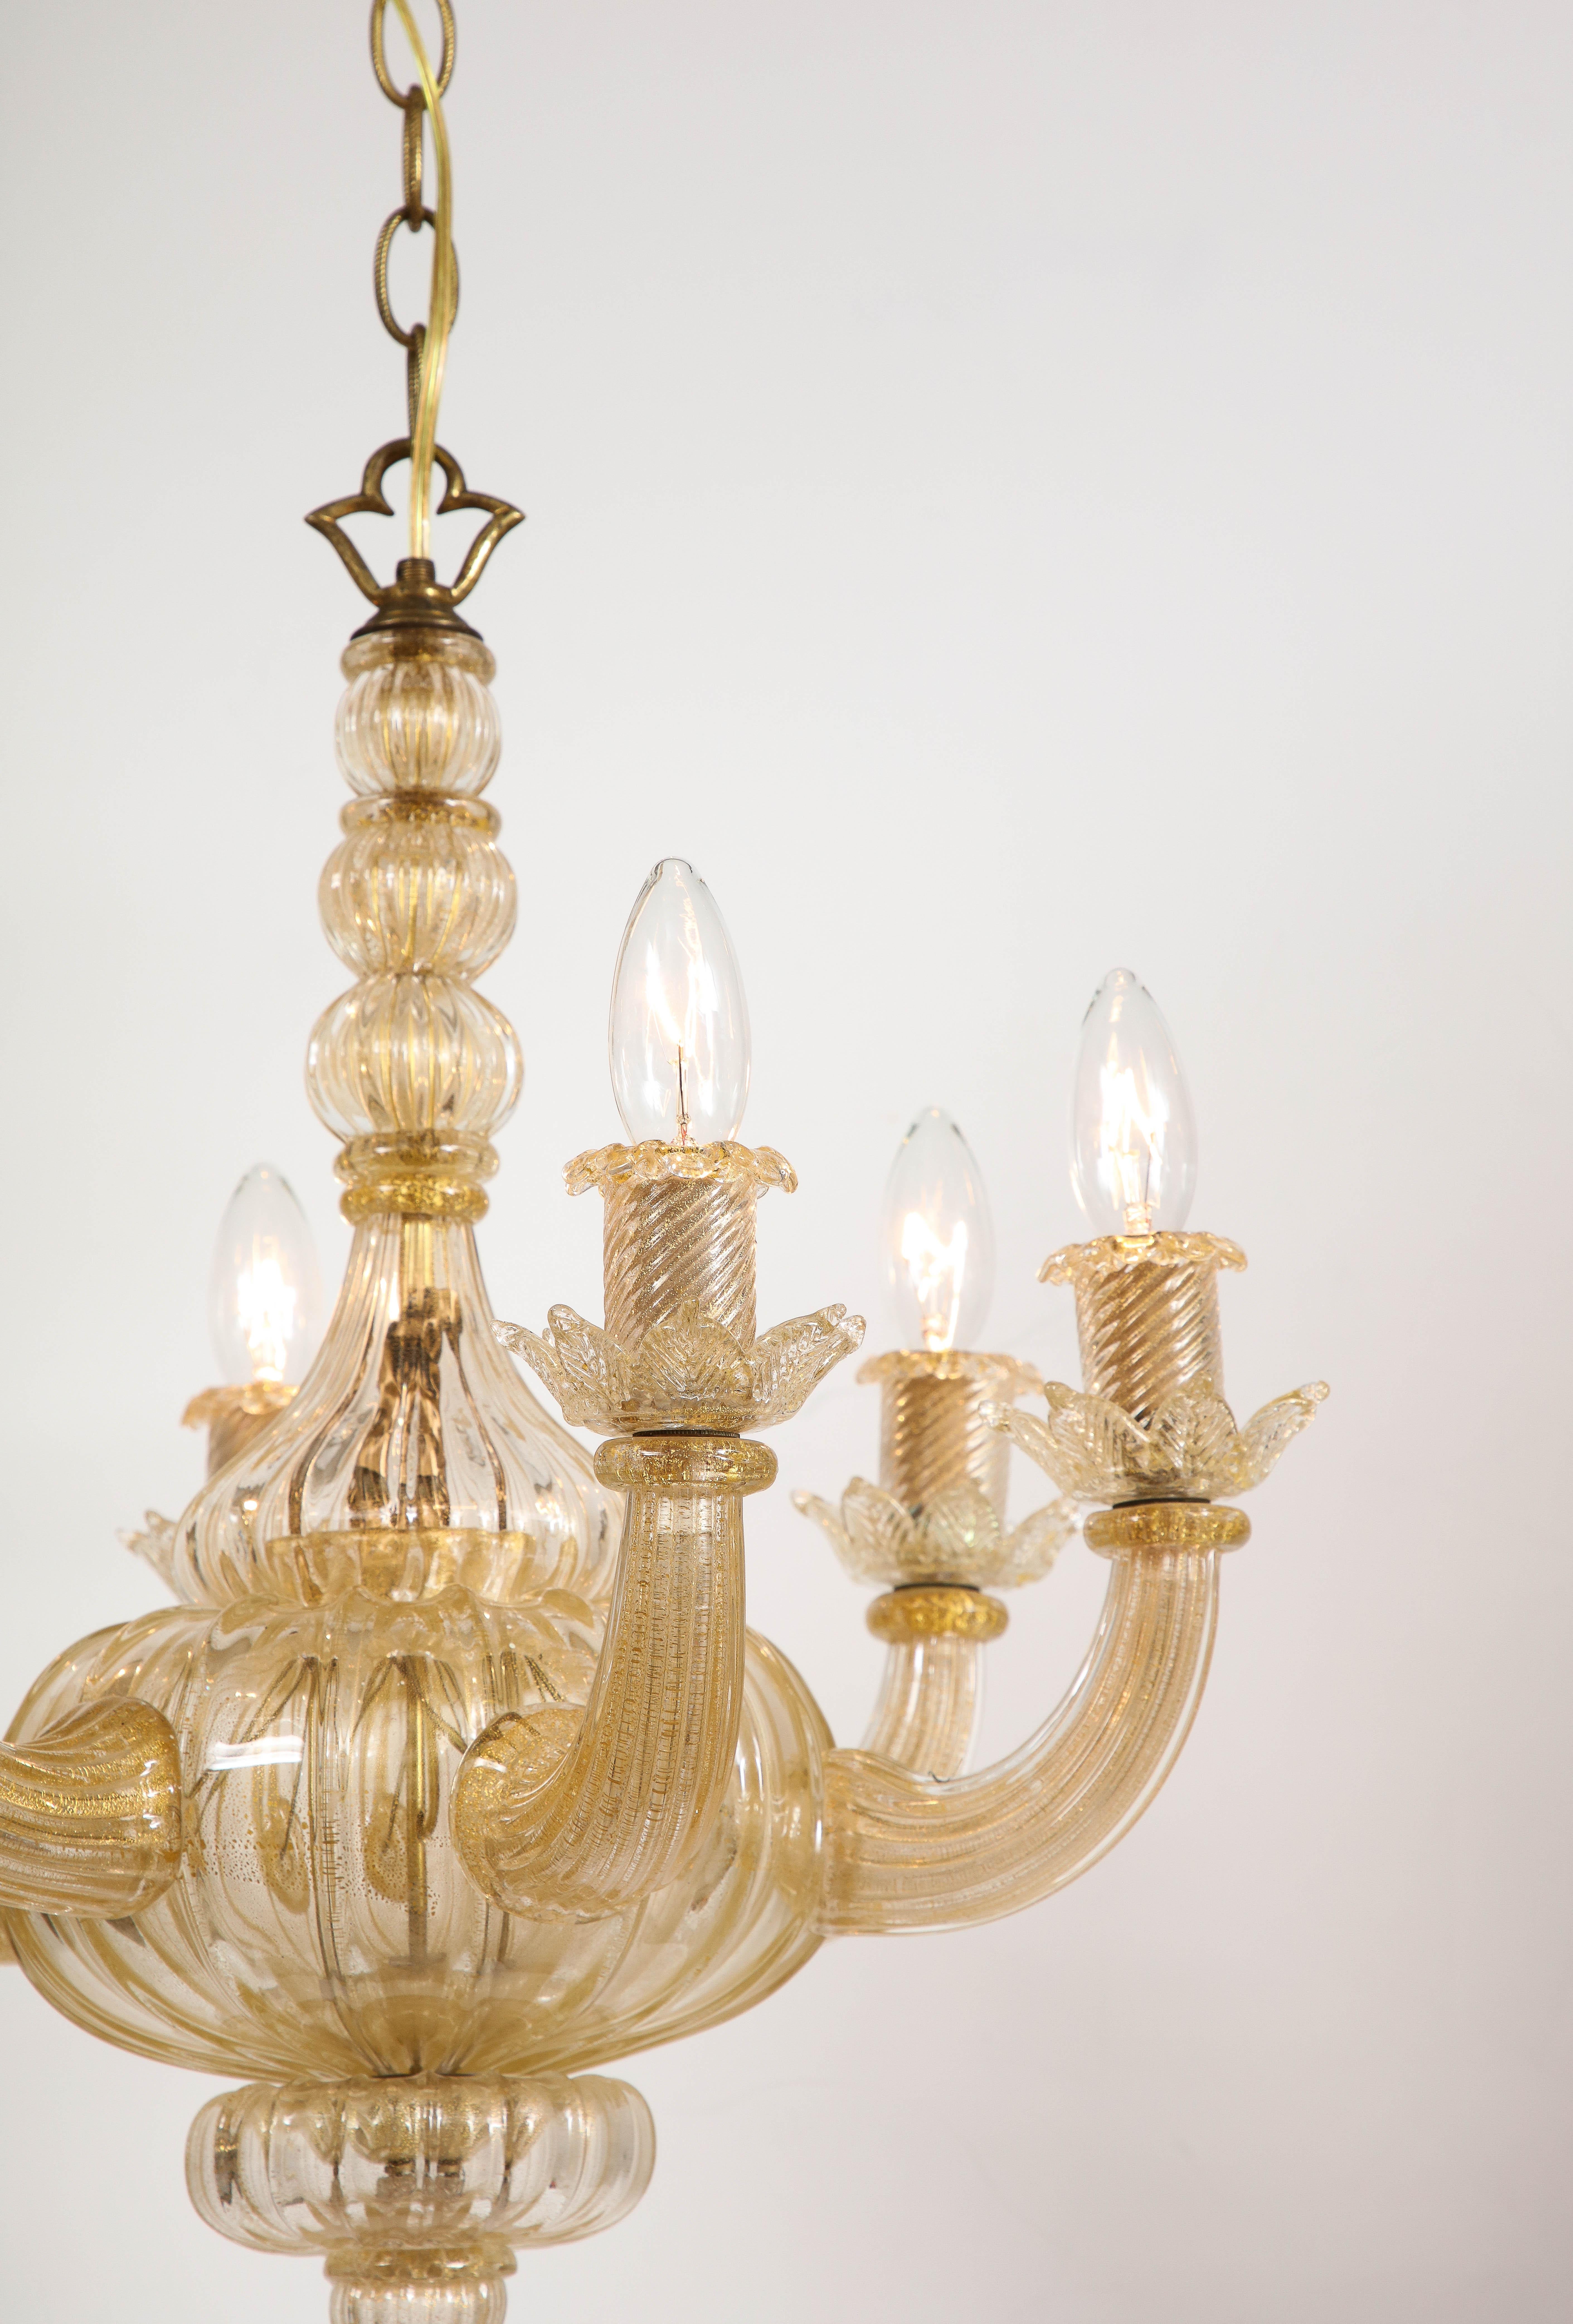 Gold Italian Murano Midcentury 6 Arm Neoclassical Style Chandelier For Sale 3